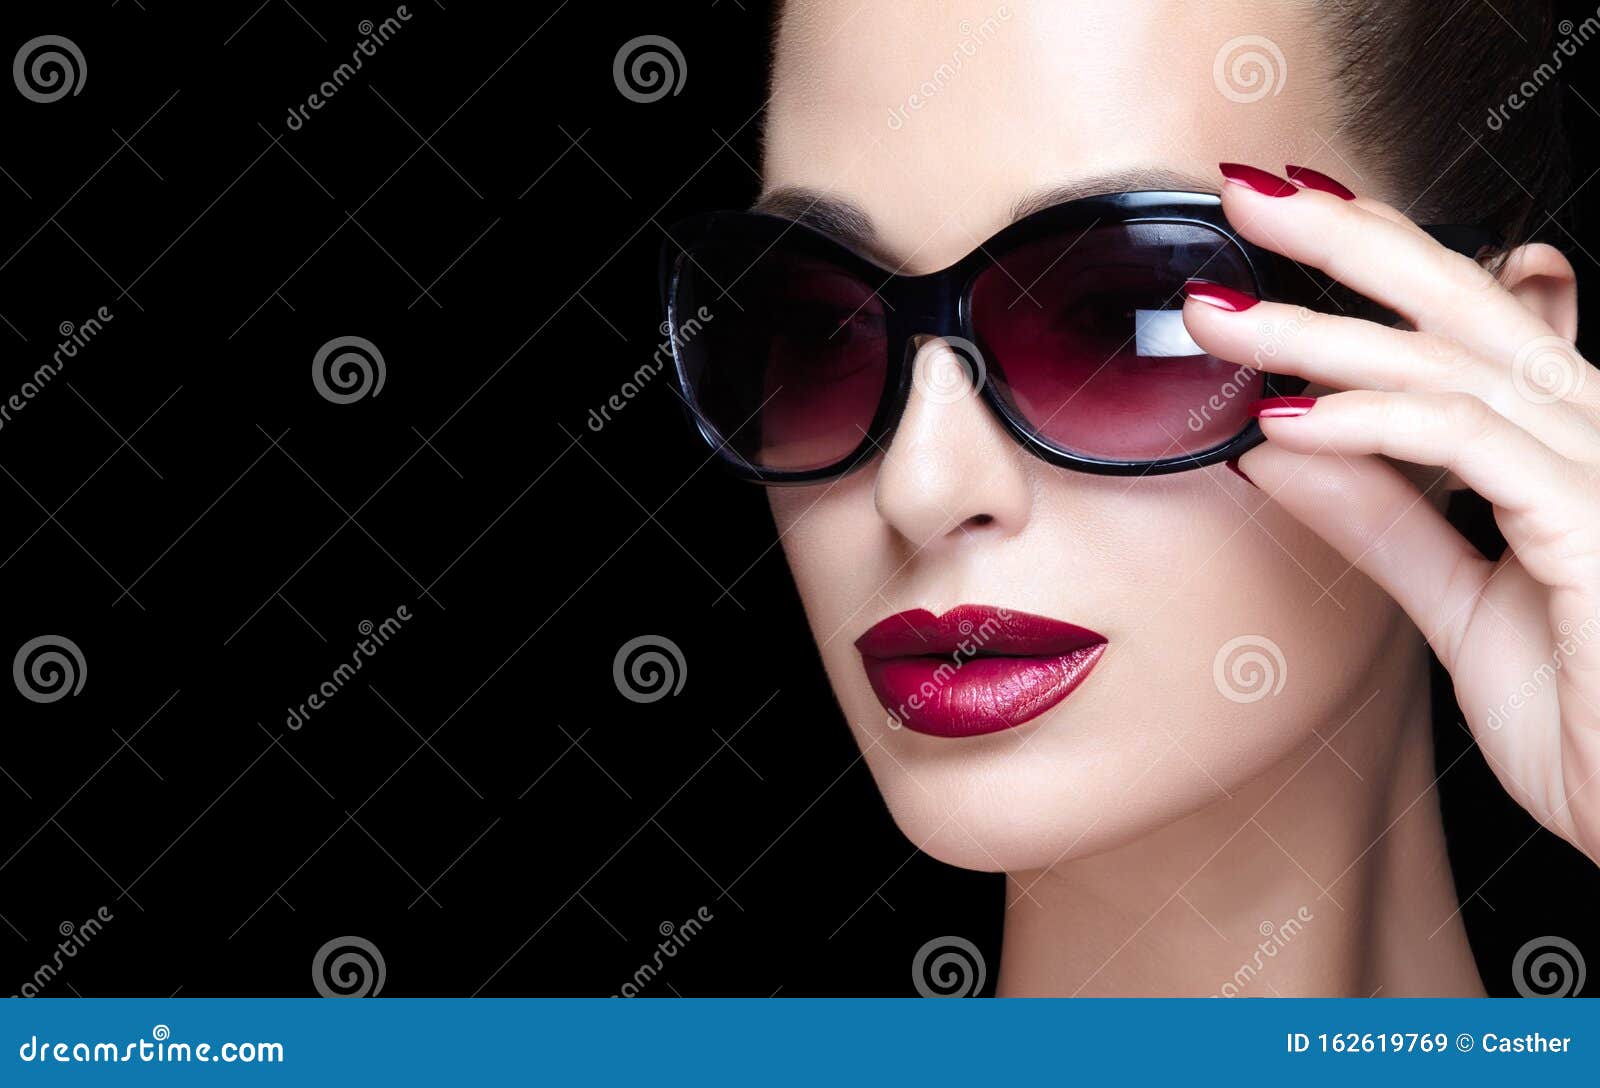 Stylish Woman with Bright Makeup and Trendy Glasses Stock Image - Image ...